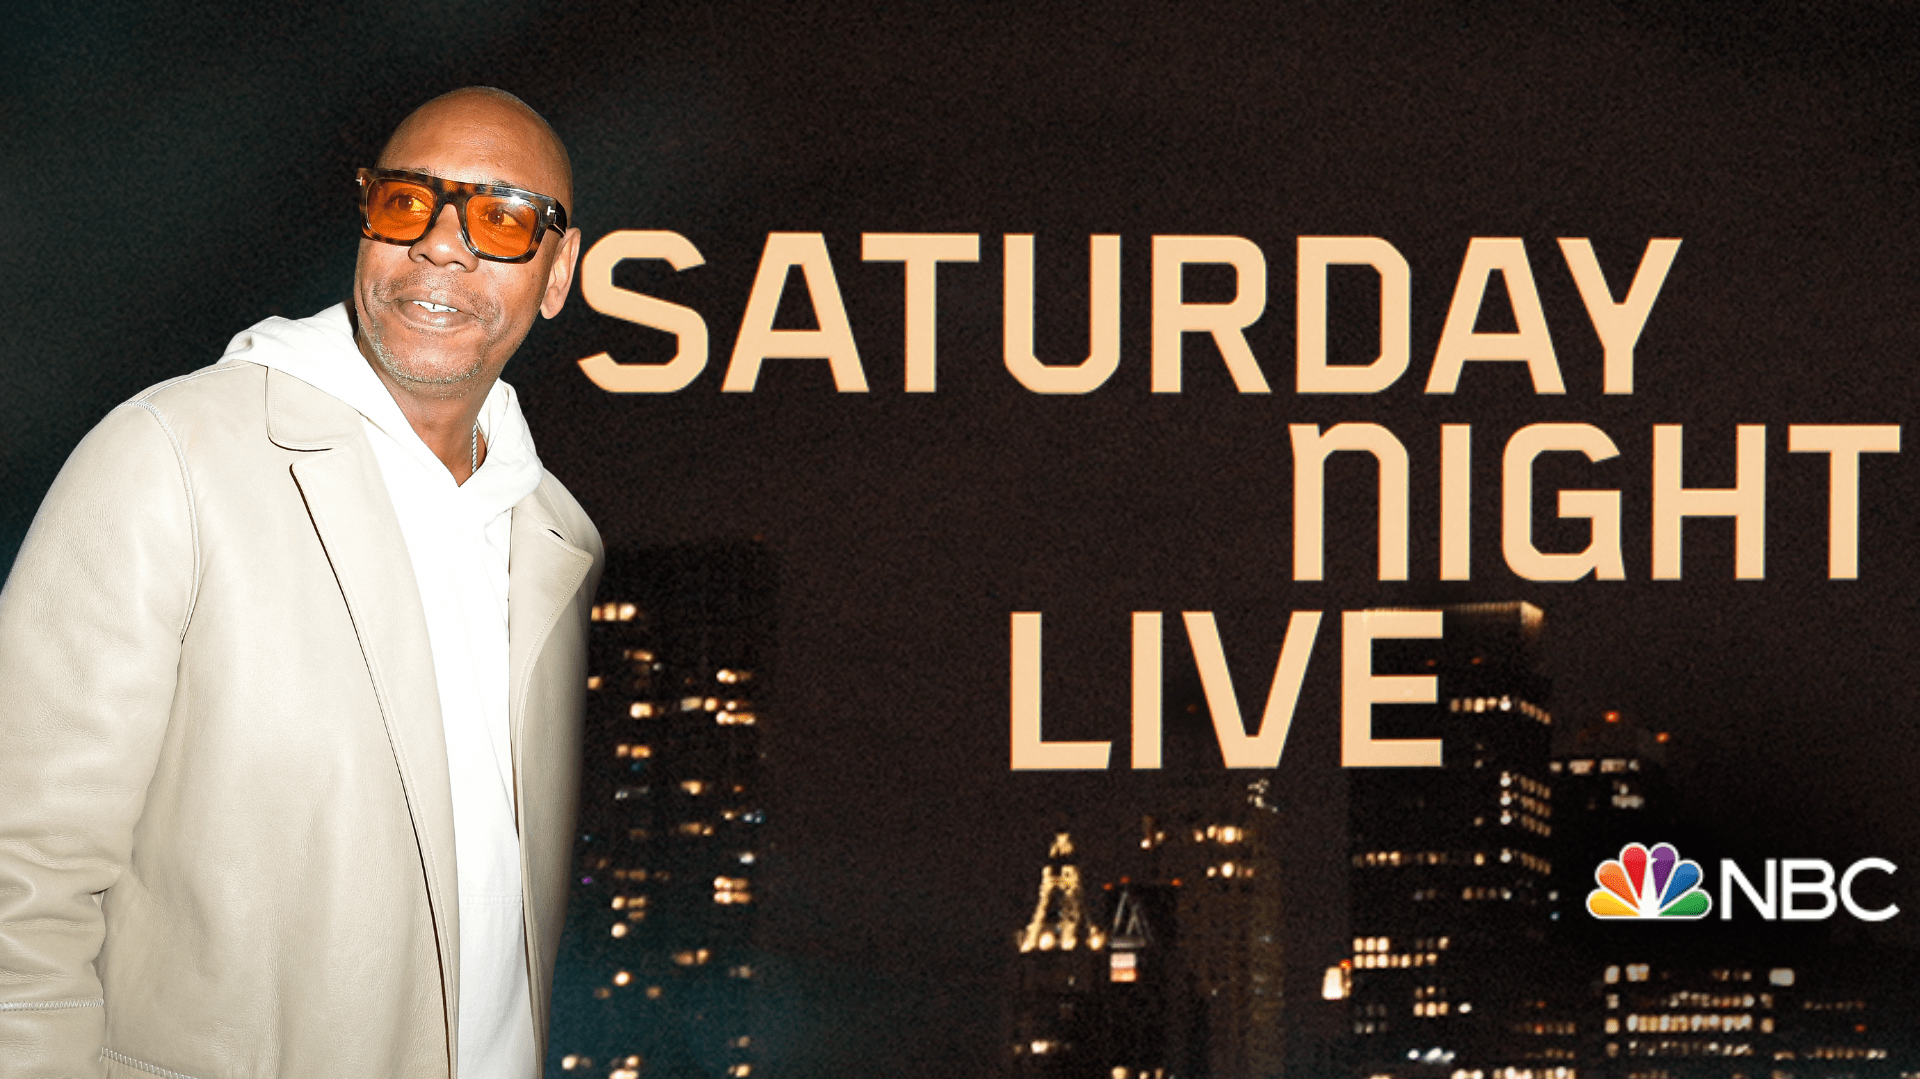 Dave Chappelle To Host Saturday Night Live With Musical Guest